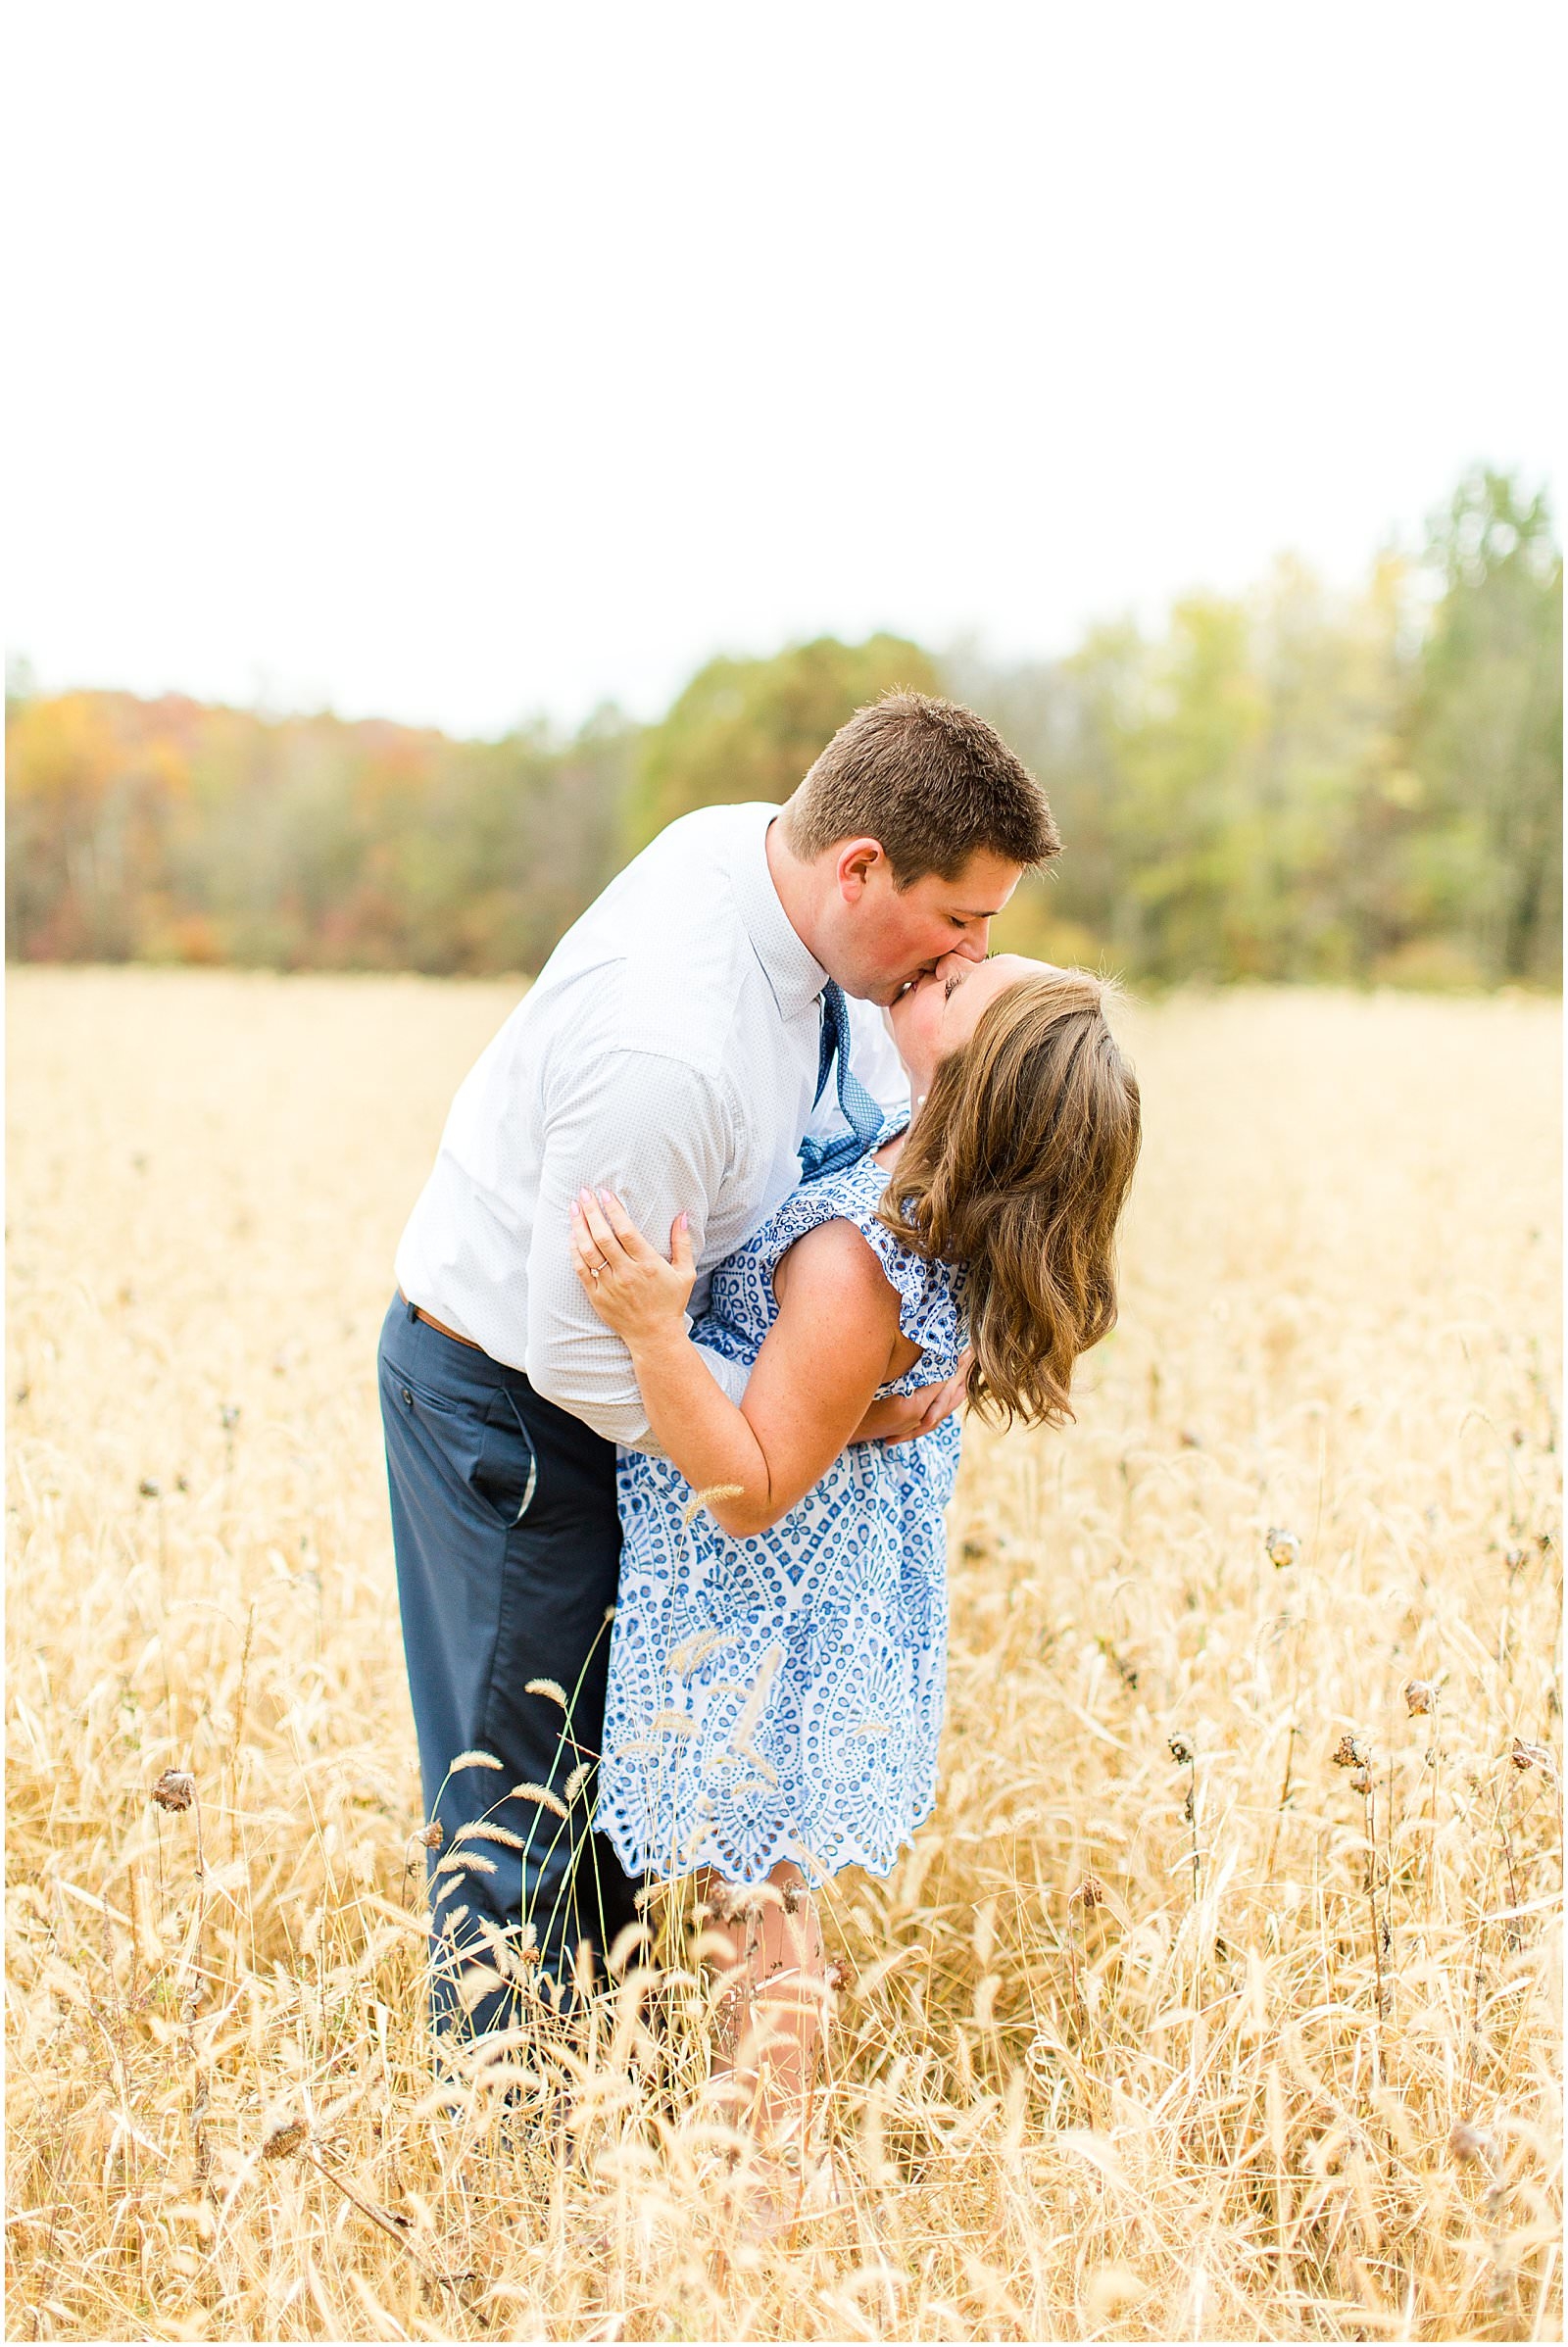 A Southern Illinois Engagement Session | Roxanne and Matthew | Bret and Brandie Photography 0021.jpg